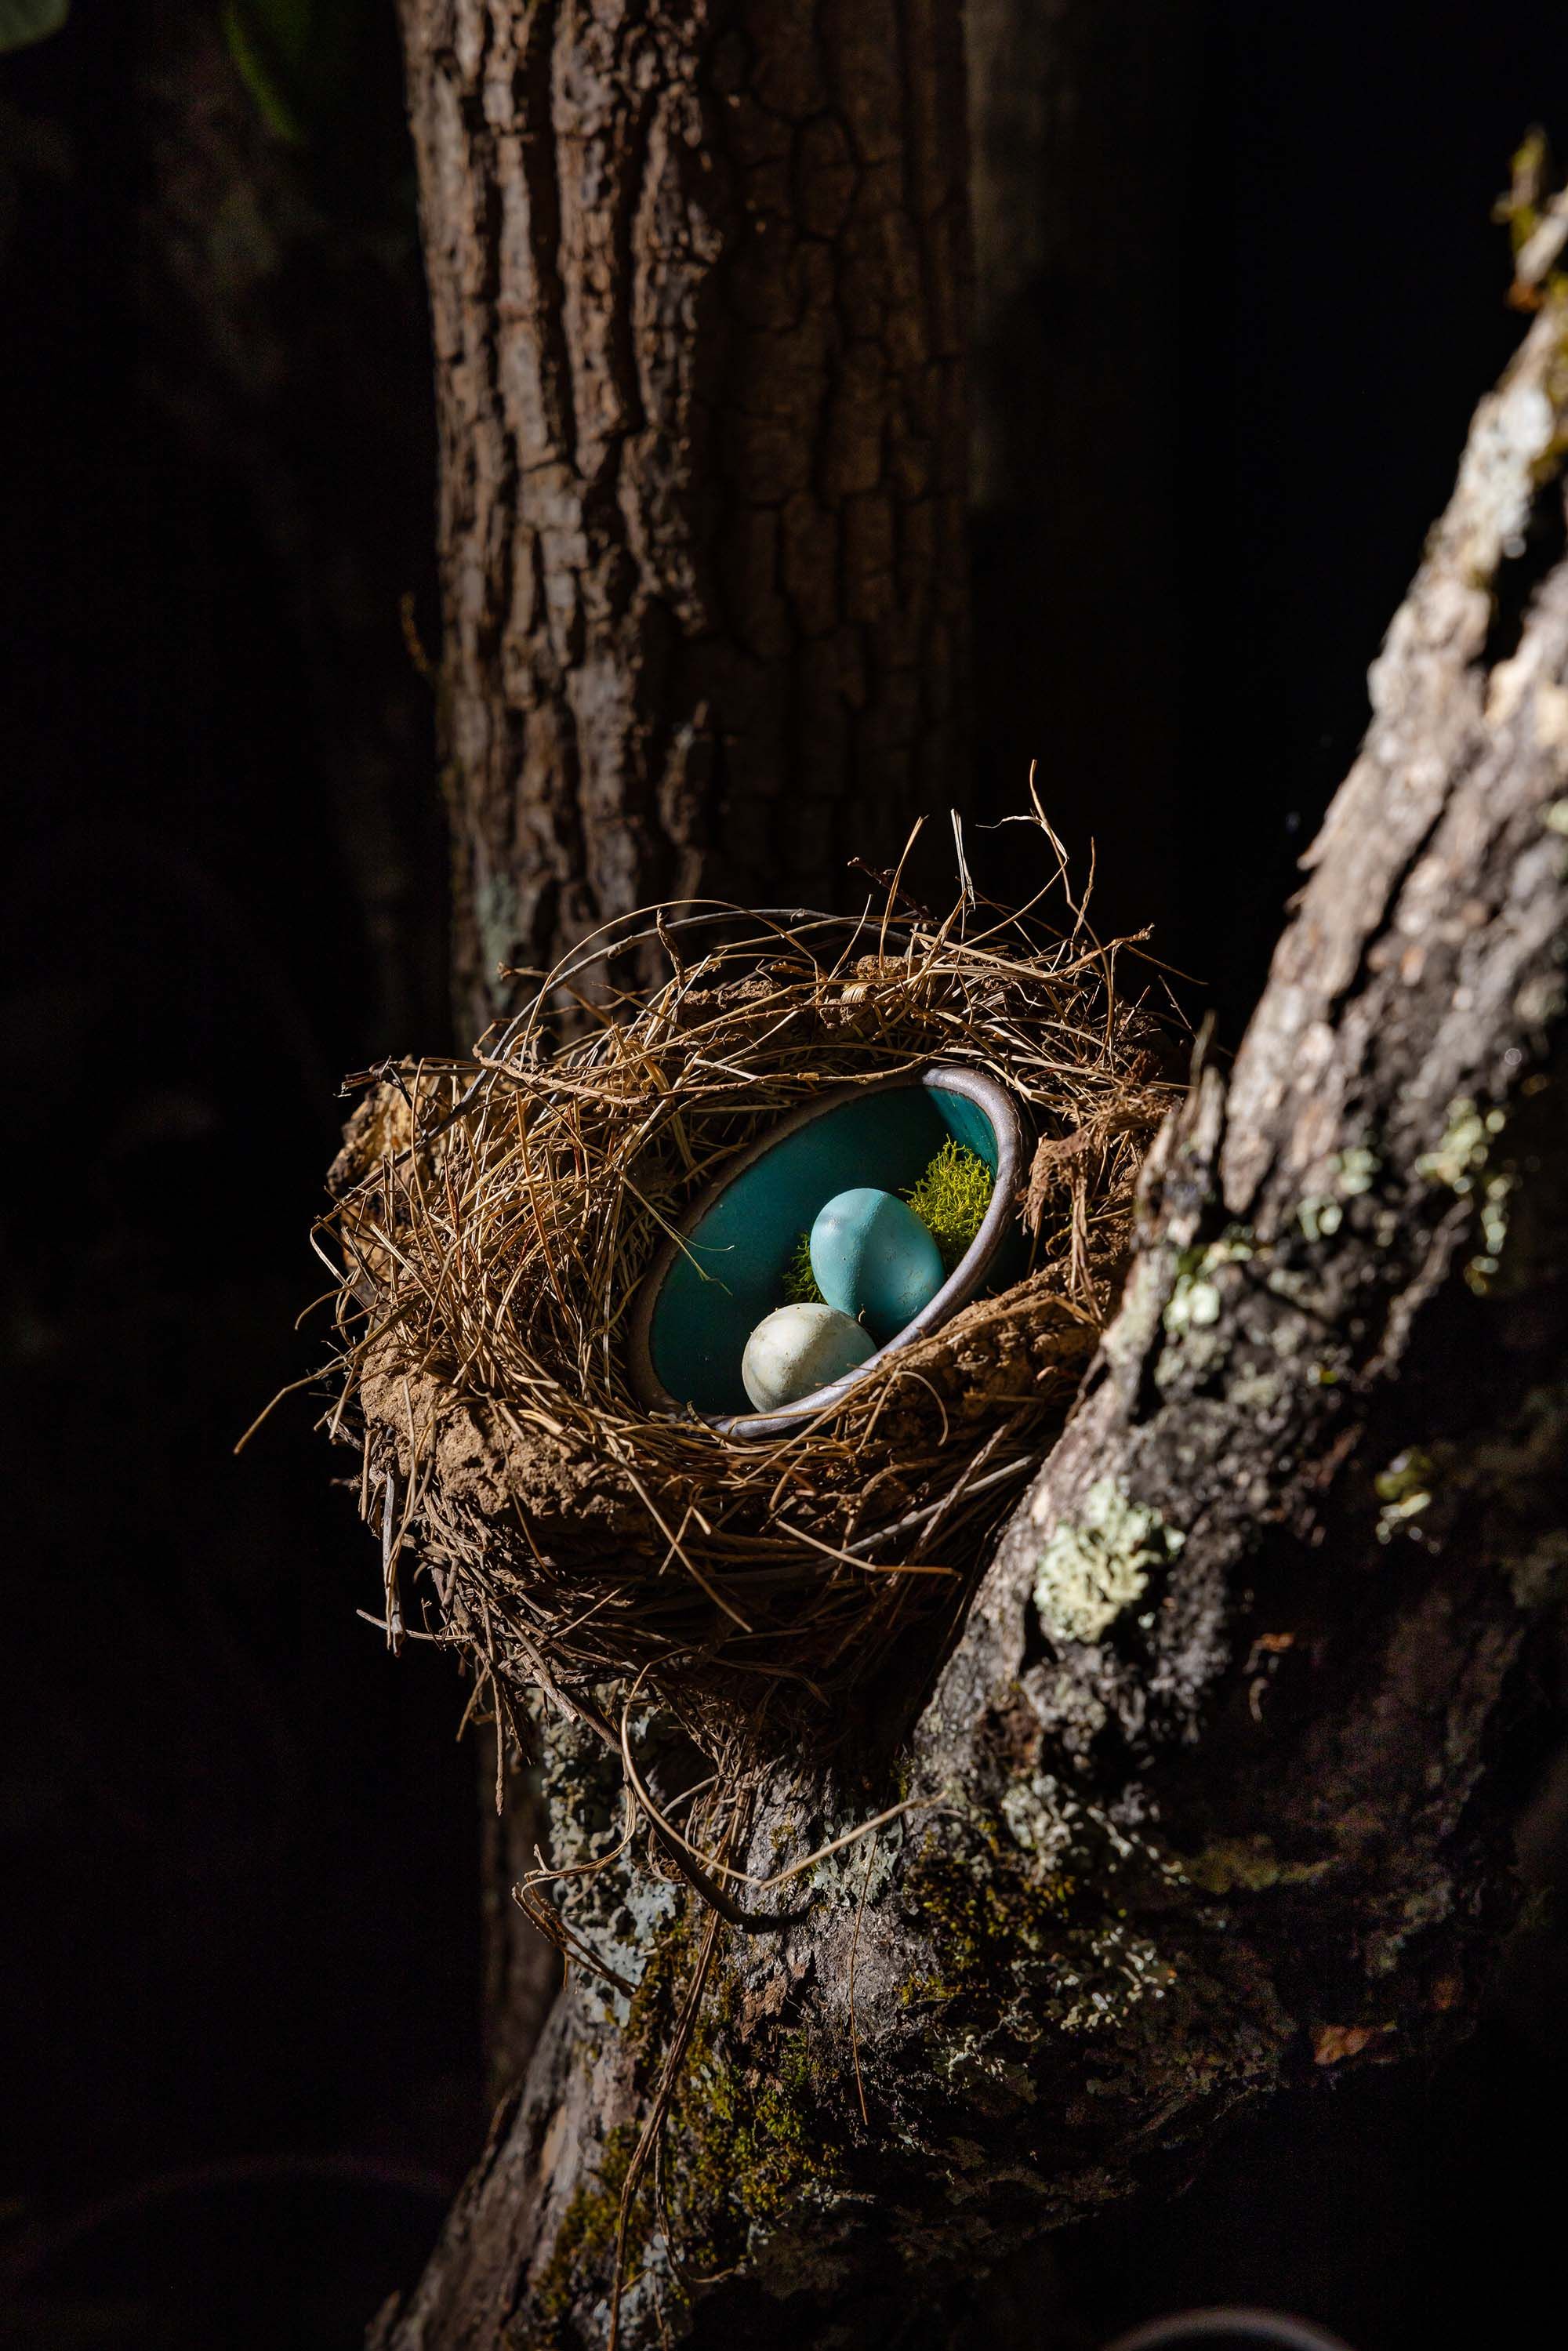 A little birds nest sits in a tree with a small ceramic teal bowl with teal and white eggs inside